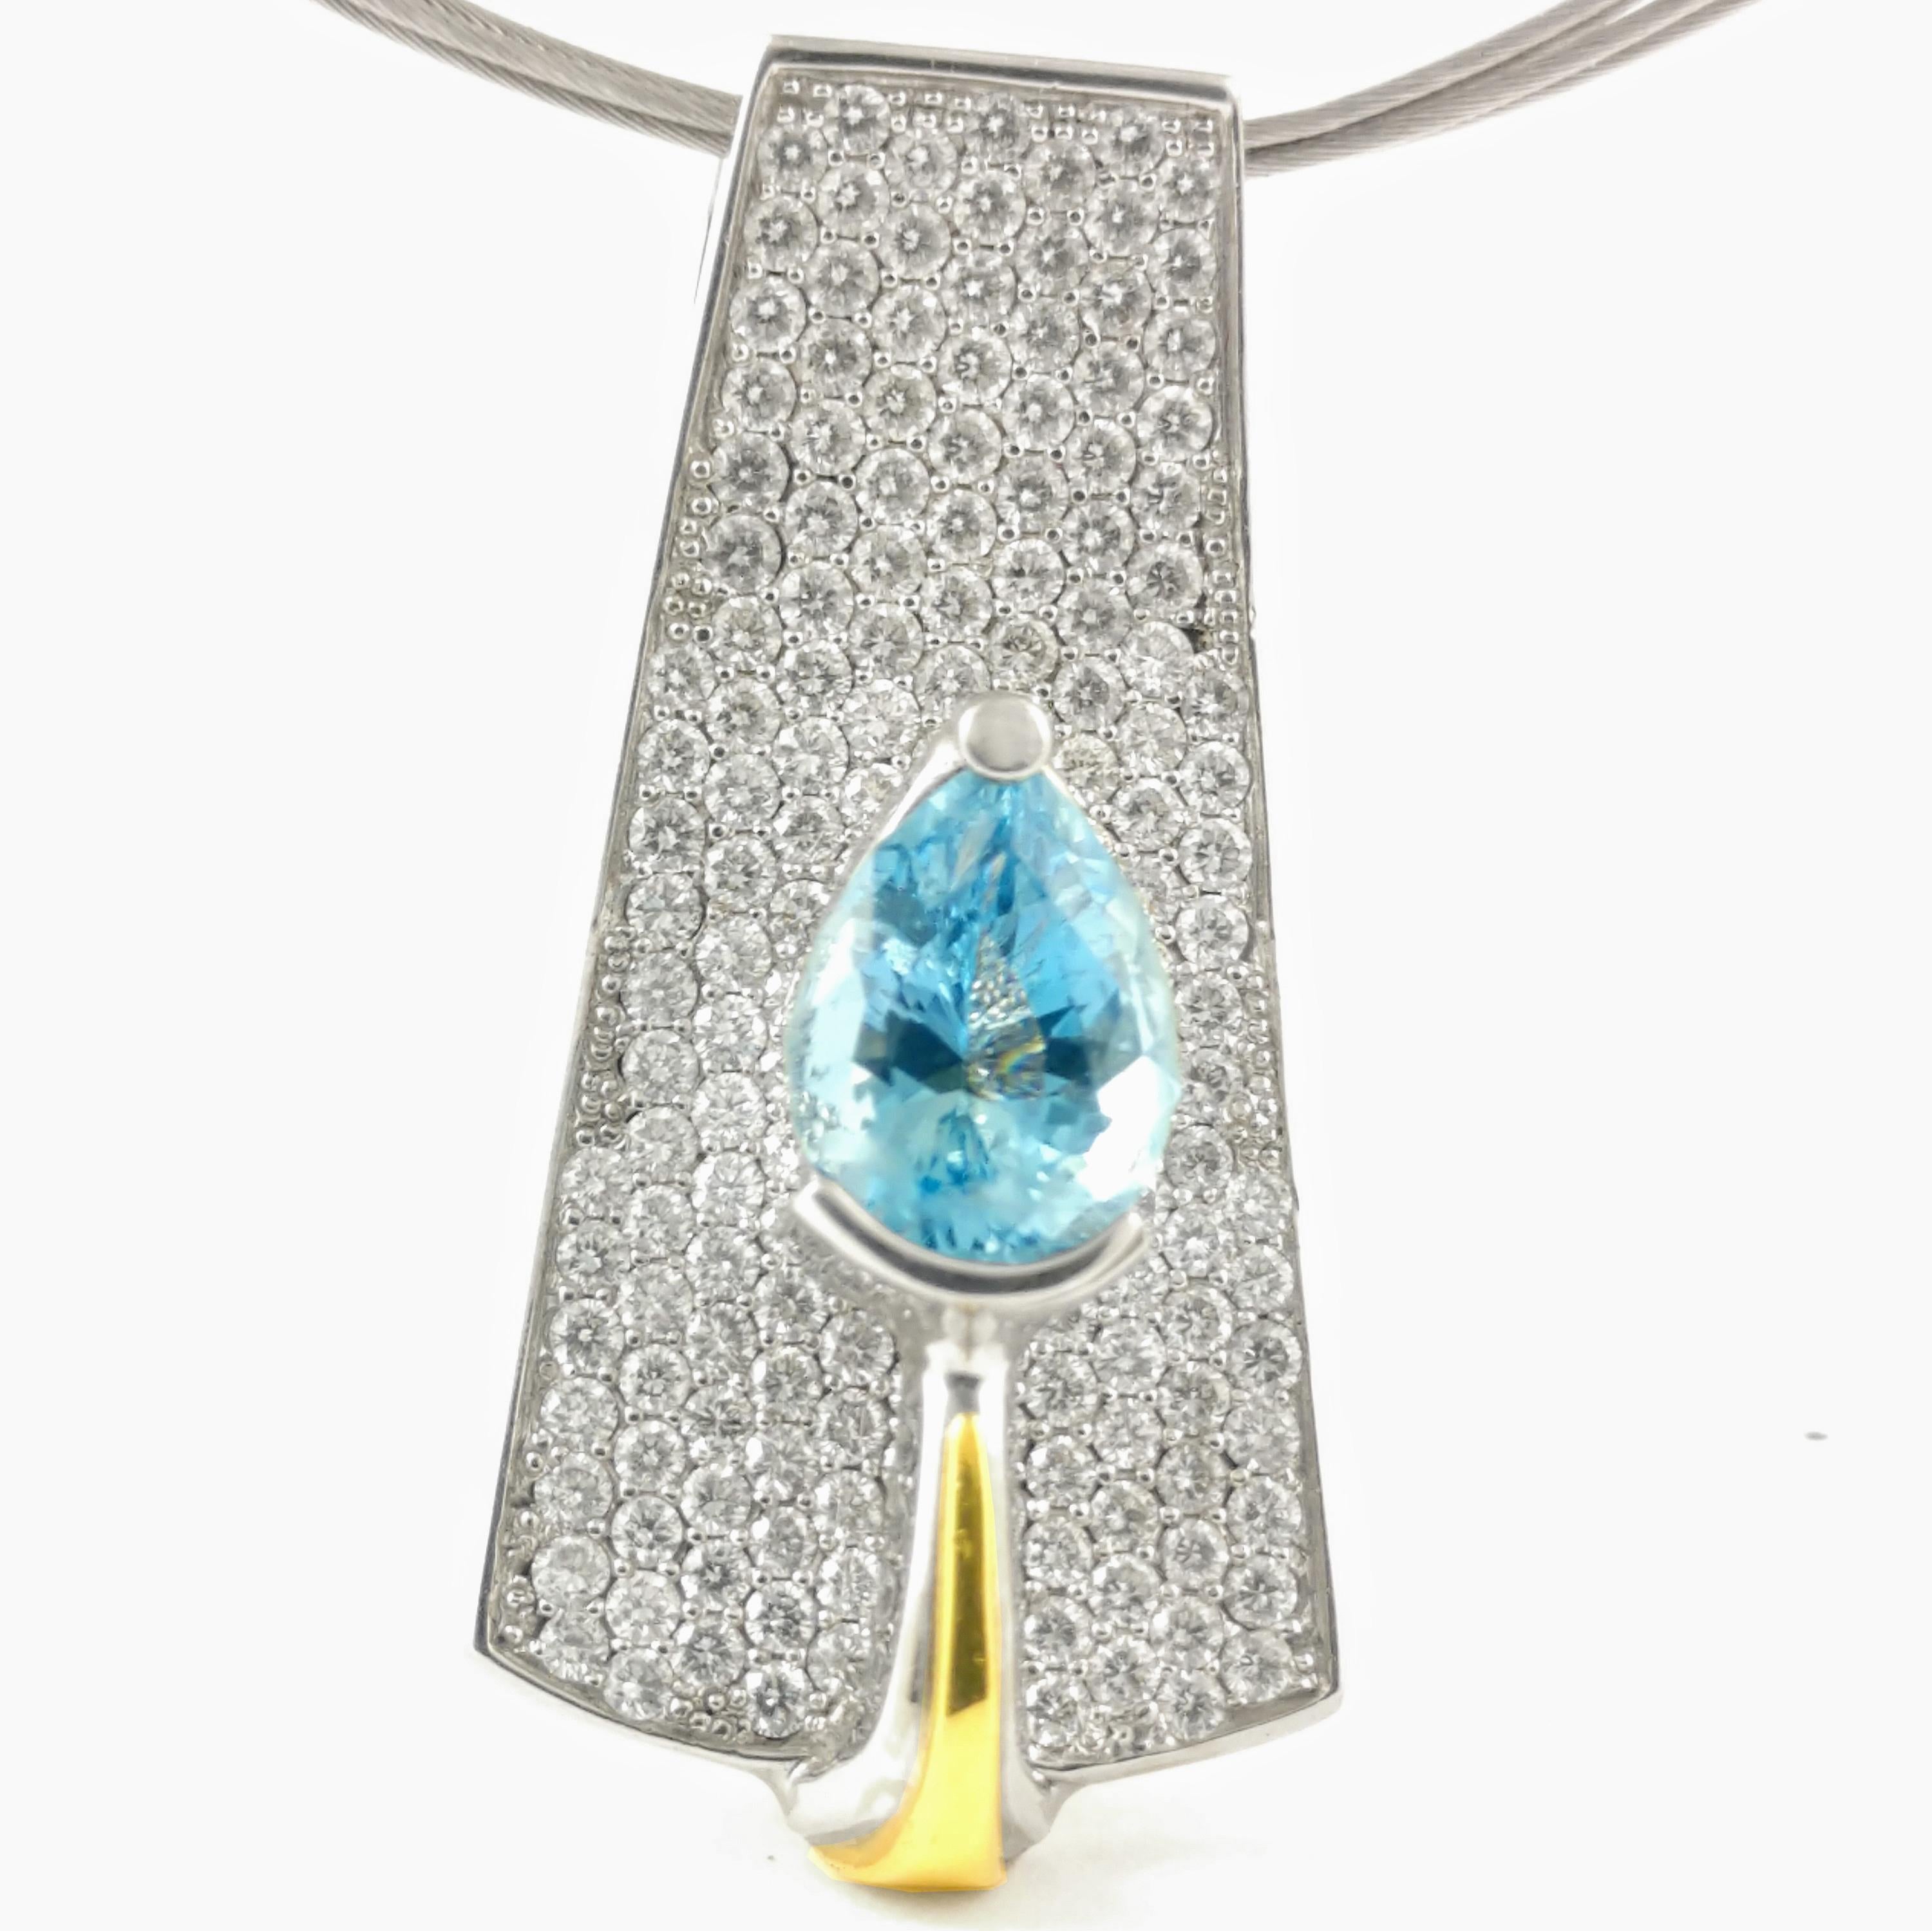 This Cornelis Hollander contemporary necklace features a beautiful pear shape aquamarine. This radiant gemstone weighs 2.49 ct. The pendant is accented with .2.80 ct. of G VS2 diamonds pave set in the 3D plate below the light blue gemstone. The